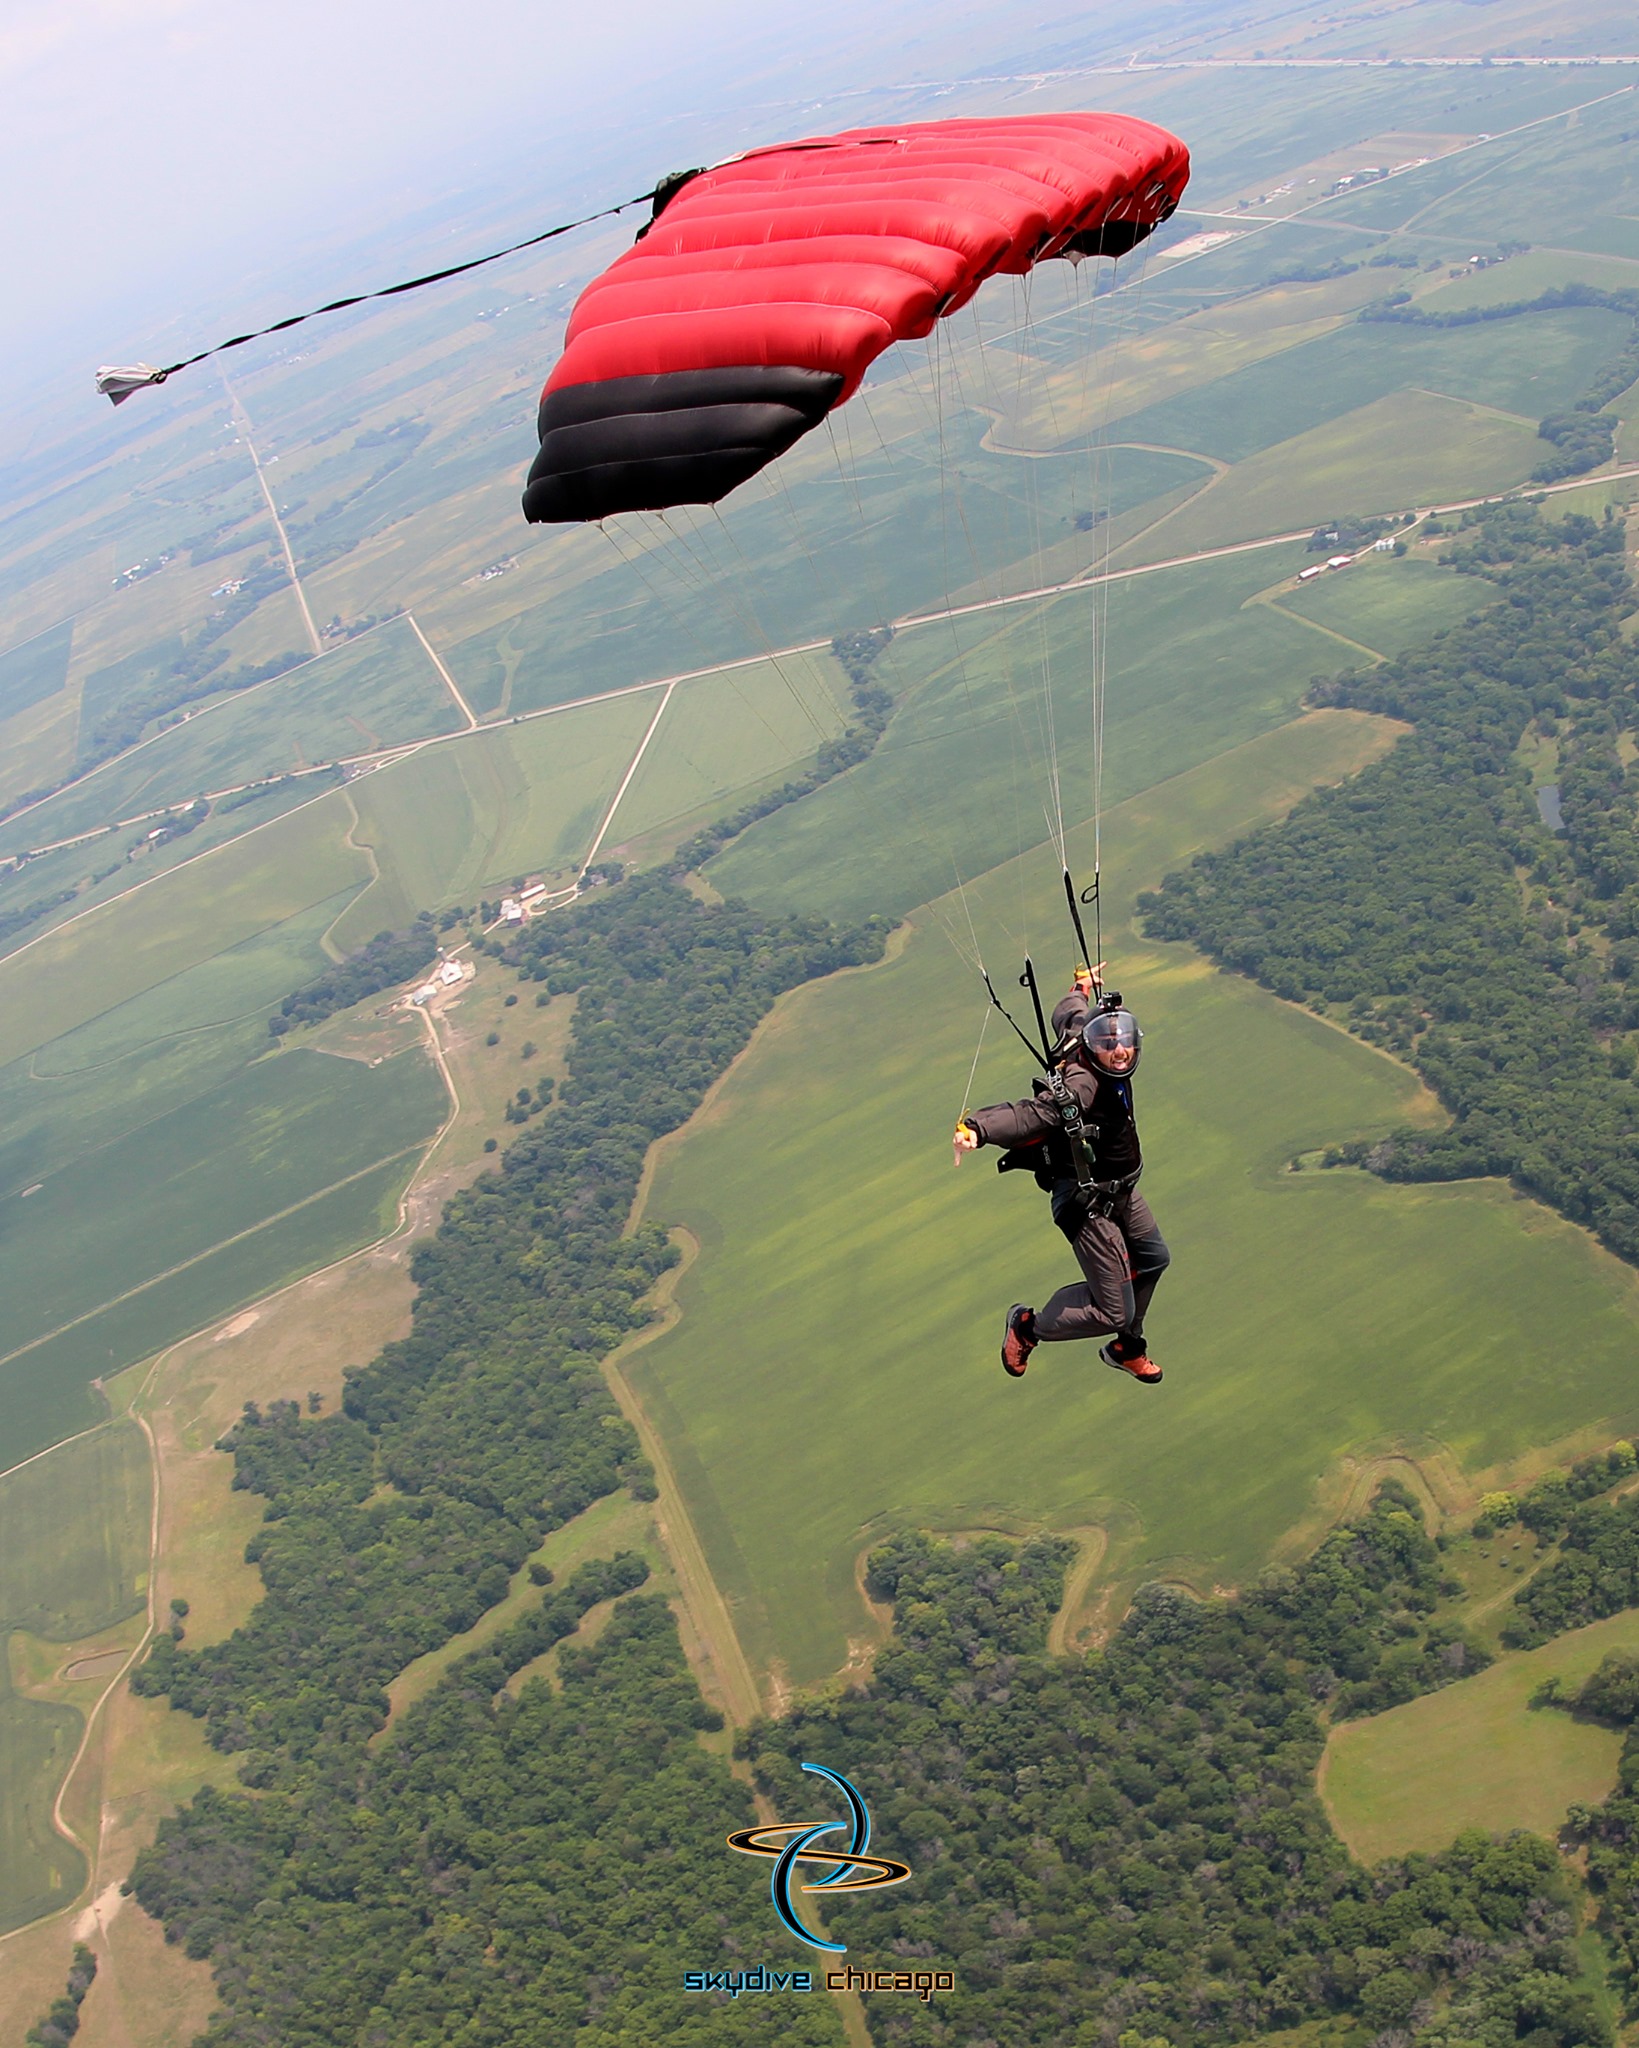 skydive chicago